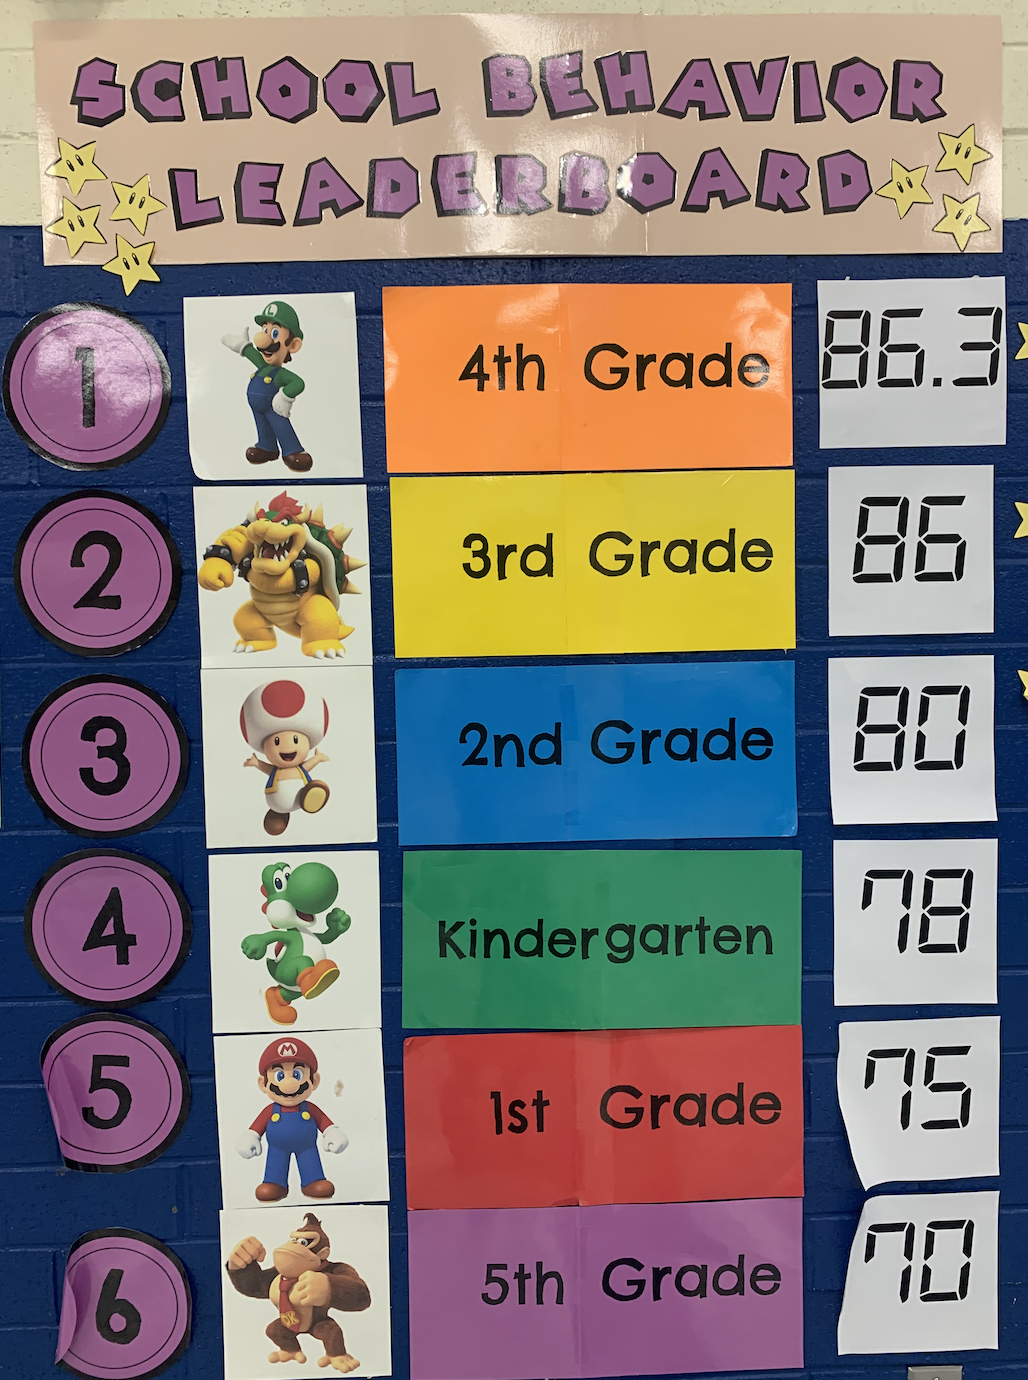 Our Mario-themed school behavior leaderboard on the lunchroom wall